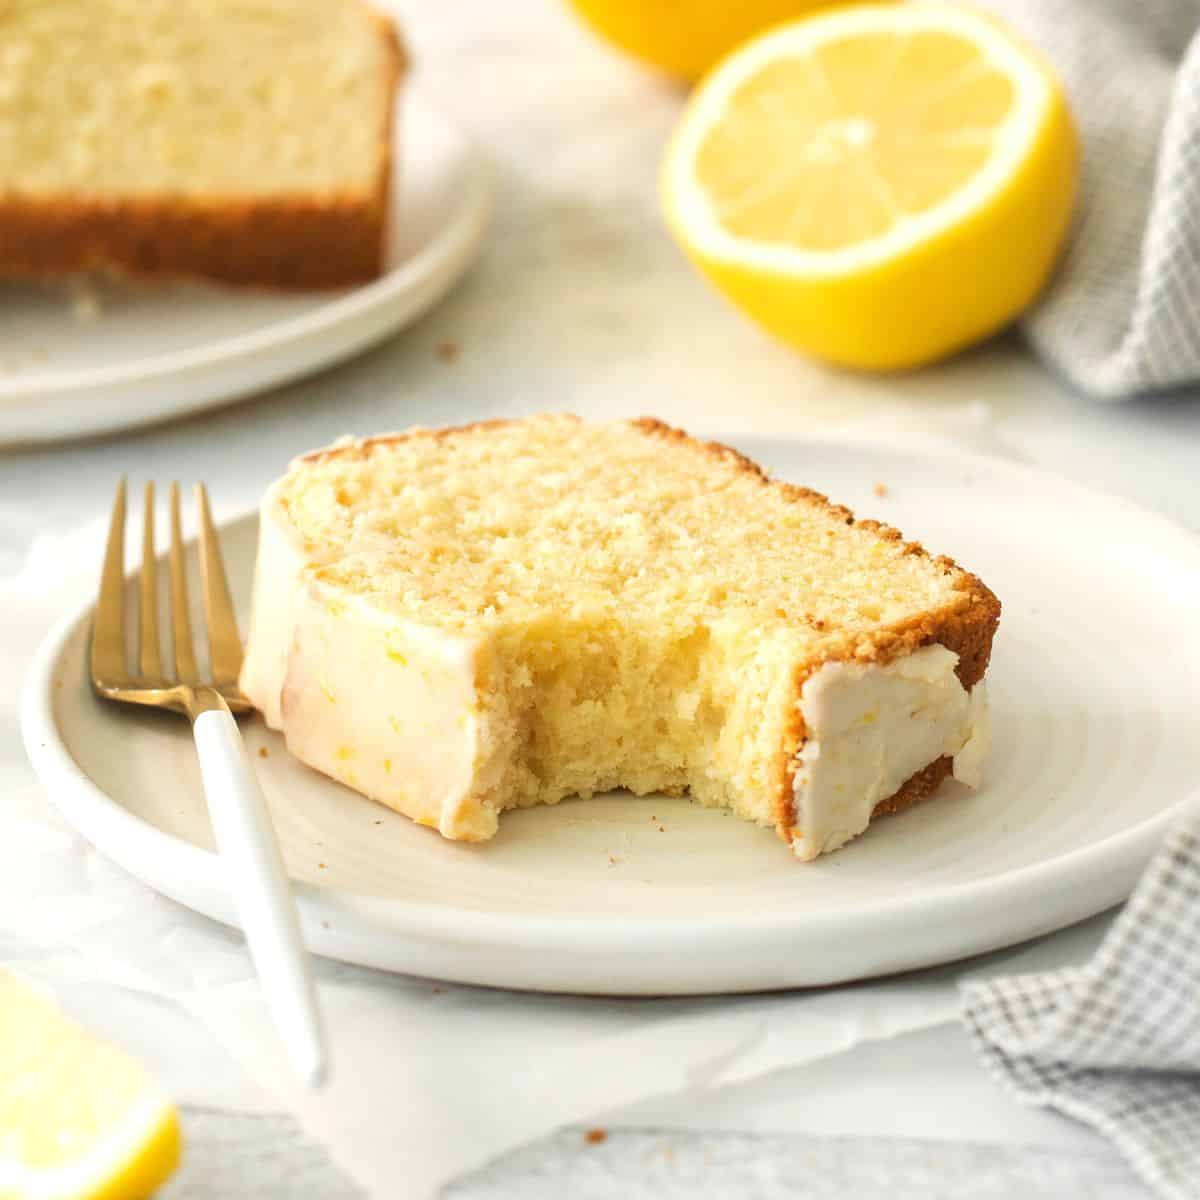 Sugar Free Lemon Pound Cake, a simple and delicious sweet, tart, and buttery dessert recipe made with no added sugar. 